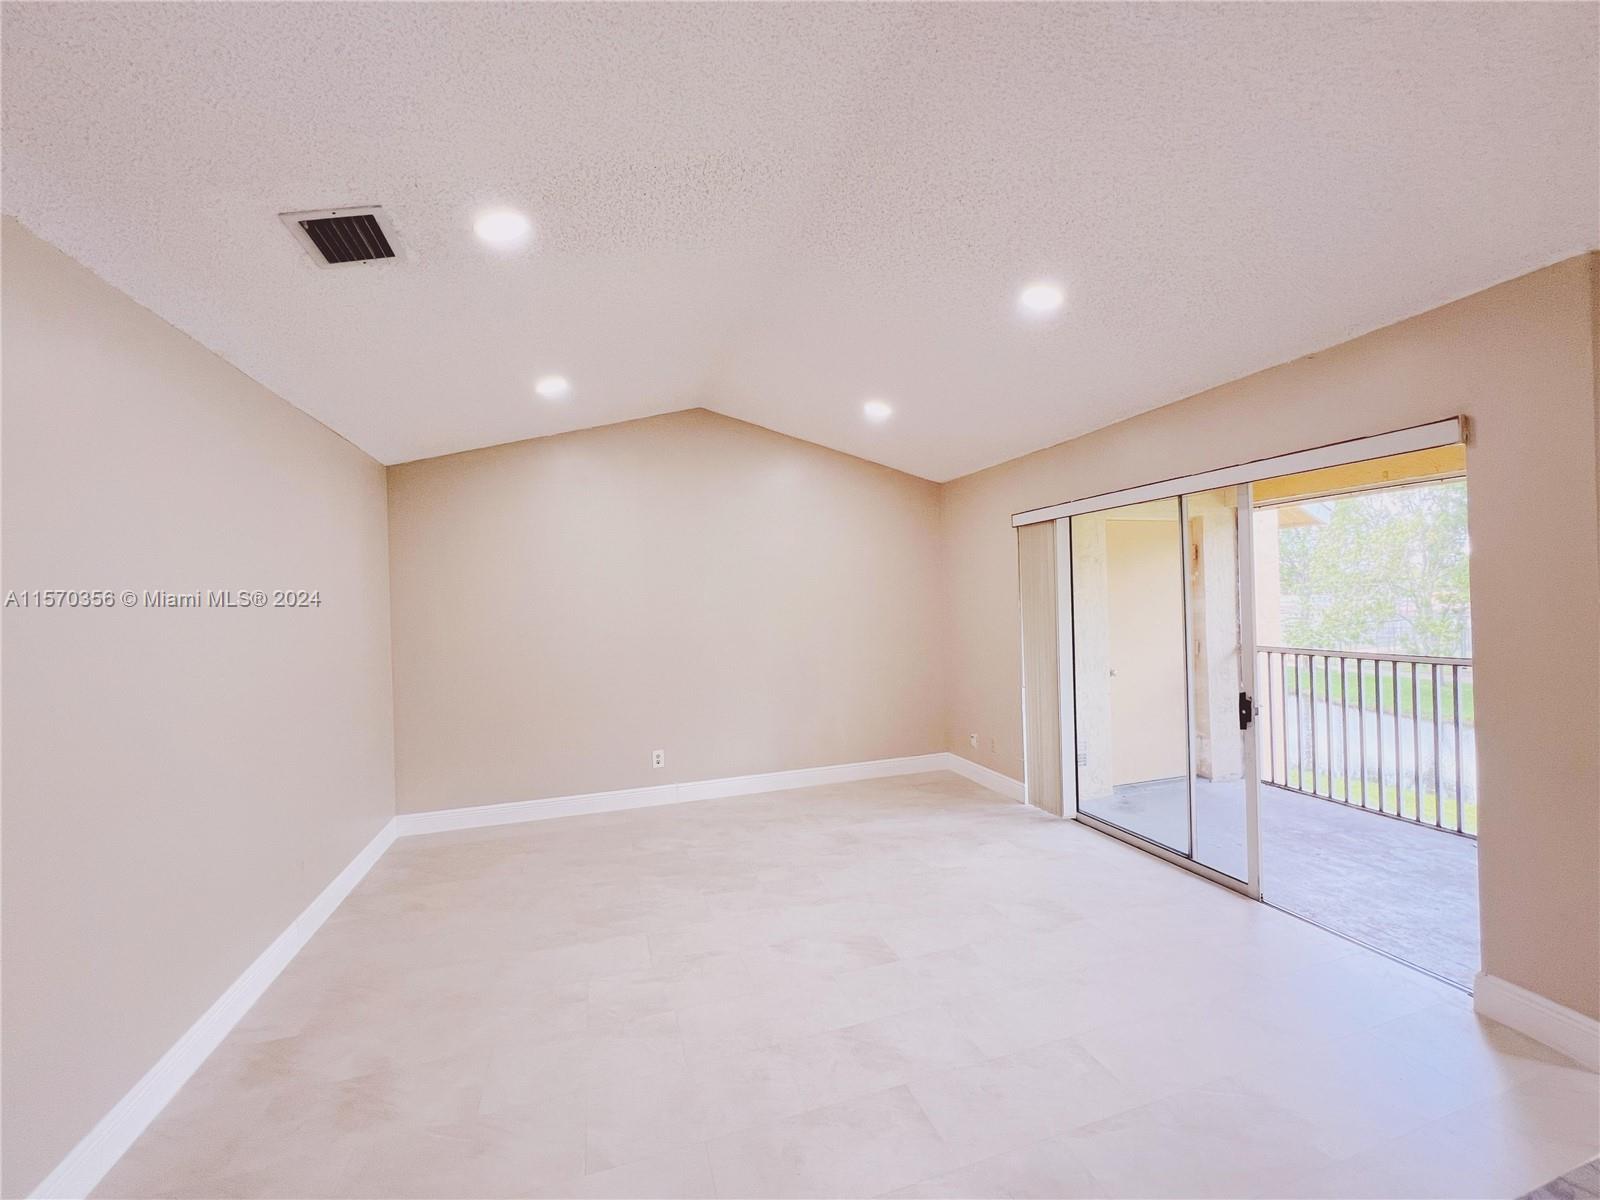 Photo of 1099 Coral Club Dr #1099 in Coral Springs, FL